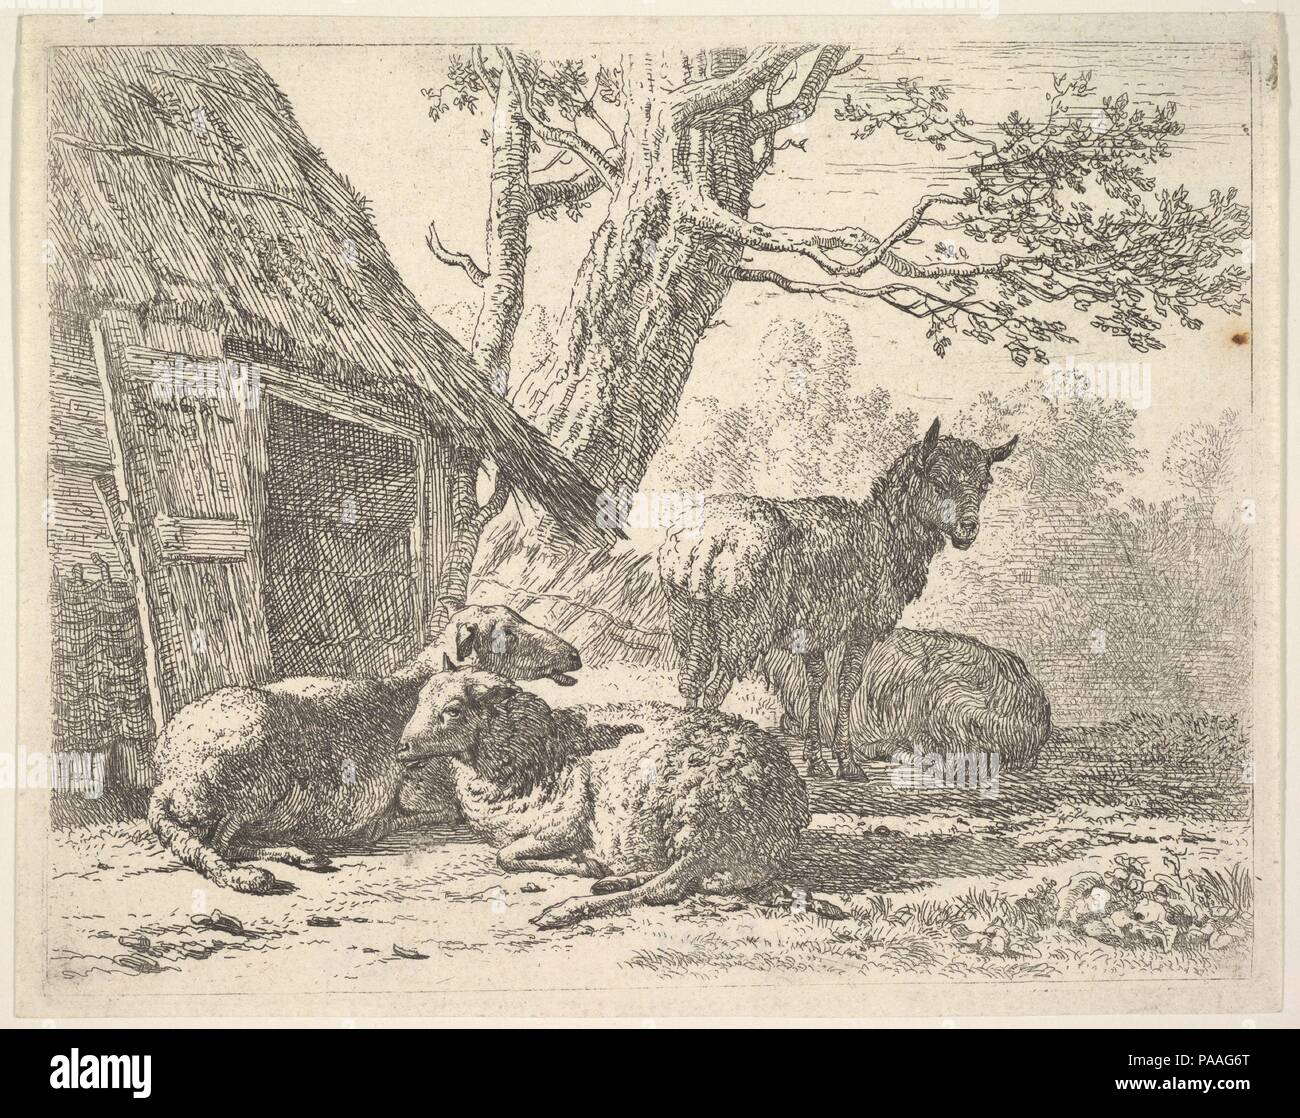 Four sheep, one sheep stands among three others lying on the ground next to a shed with thatched roof and open door. Artist: Karel Dujardin (Dutch, Amsterdam 1622-1678 Venice). Dimensions: plate: 4 7/8 x 6 1/8 in. (12.4 x 15.5 cm)  sheet: 5 1/16 x 6 3/8 in. (12.9 x 16.2 cm). Date: 1658. Museum: Metropolitan Museum of Art, New York, USA. Stock Photo